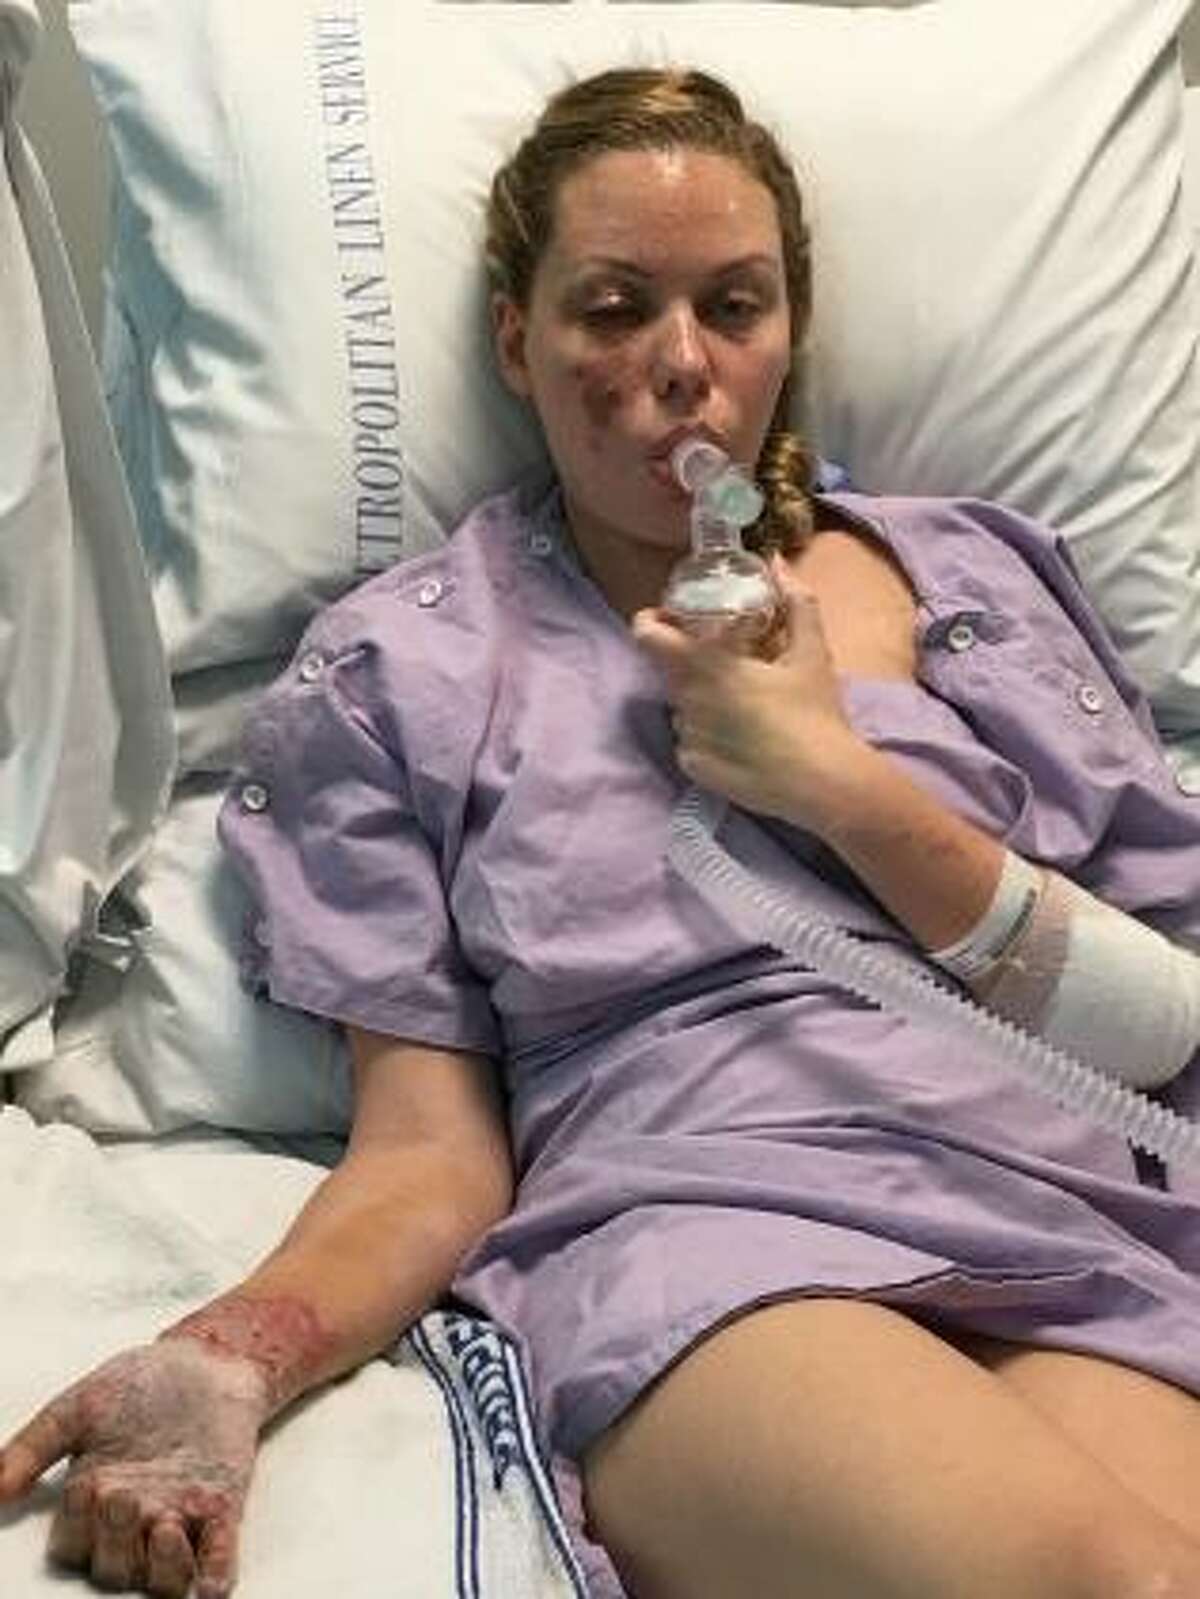 Felicia Djamirze, beauty queen and former Miss Australia, claims she could lose vision in her right eye after police detonated a flash bomb in her home on Feb. 9, which exploded in her face.